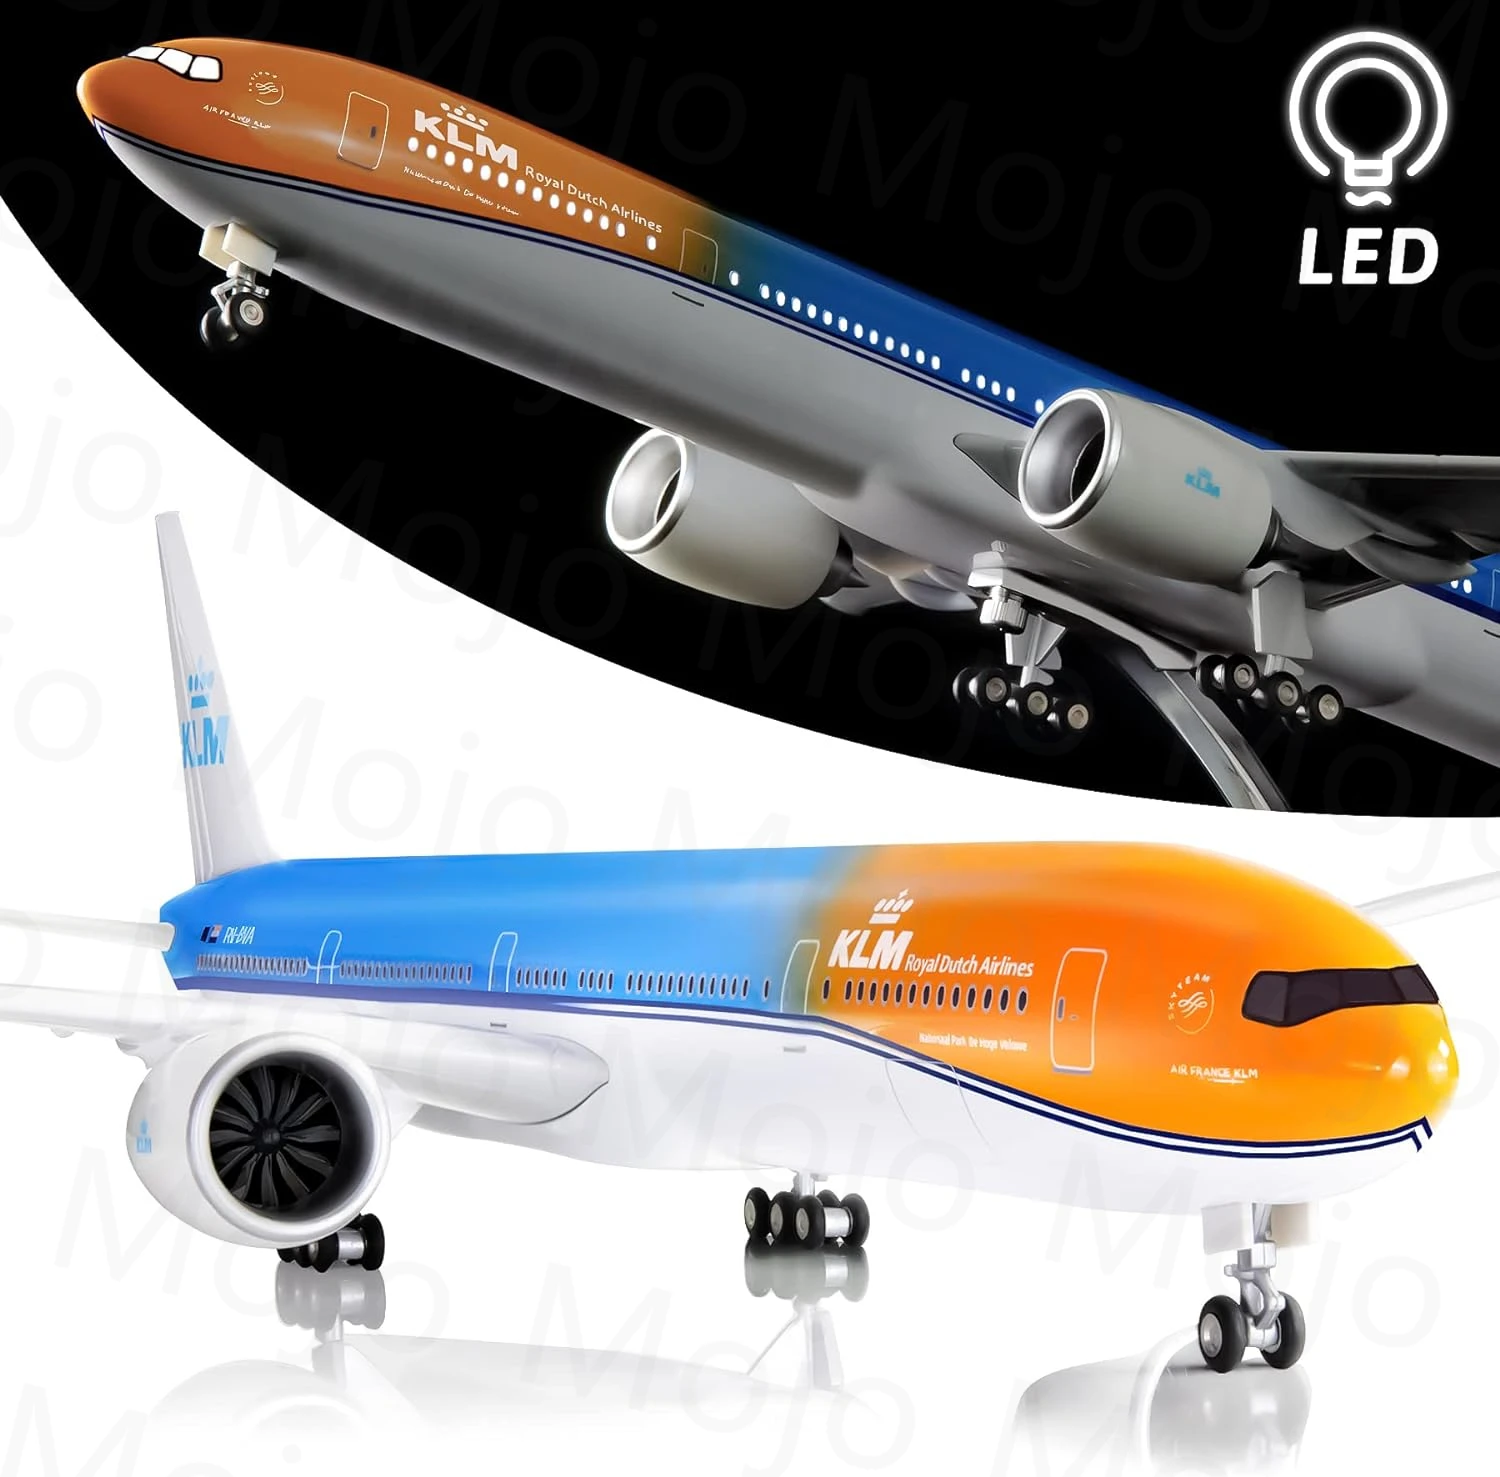 

1:157 Scale 47cm Large 777 Model Airplane Holland KLM Boeing B777 Plane Models Diecast Airplanes with LED Light for Collection